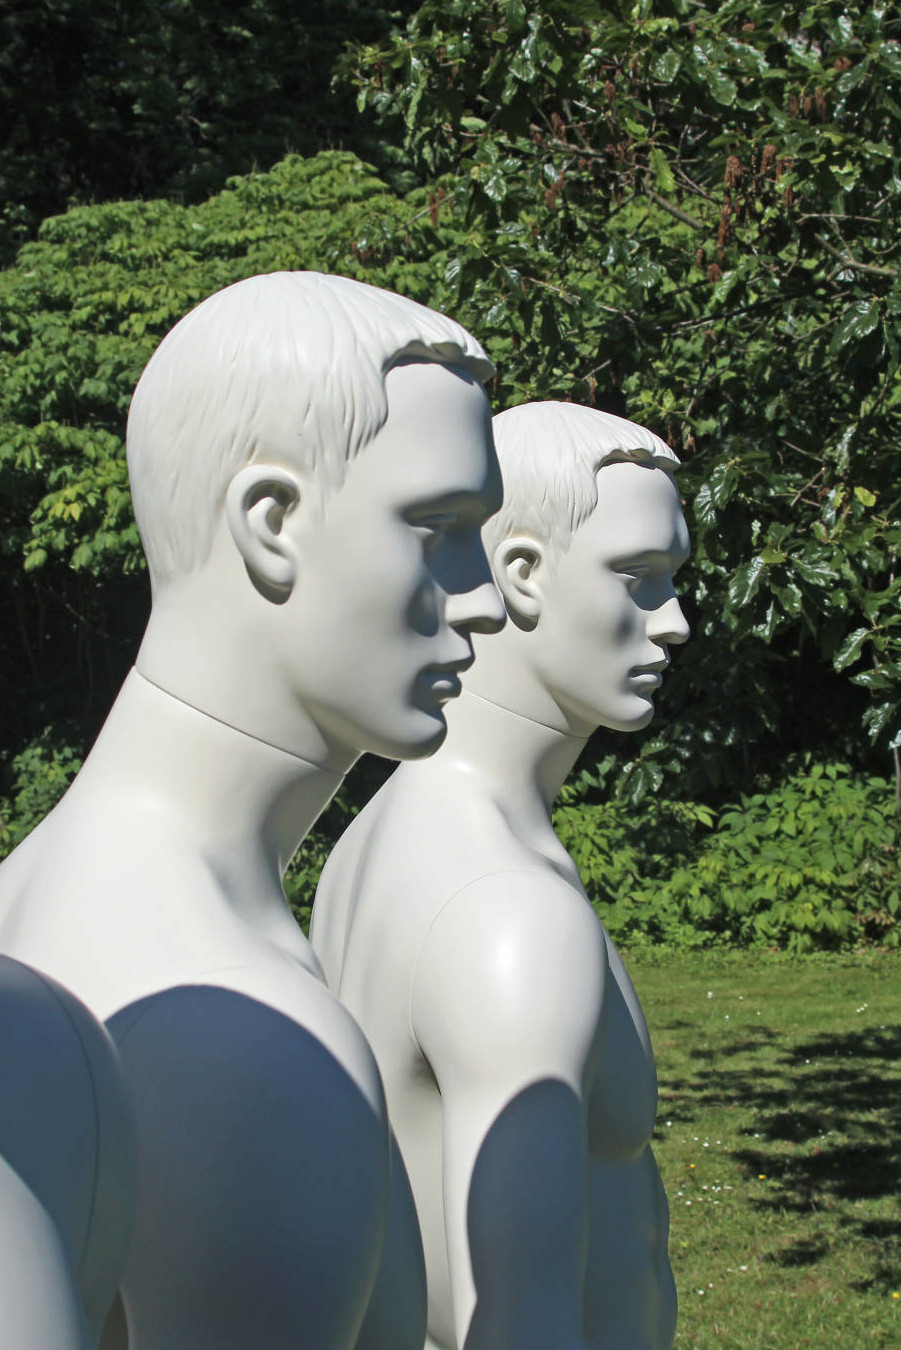 Stylized mannequins in nature